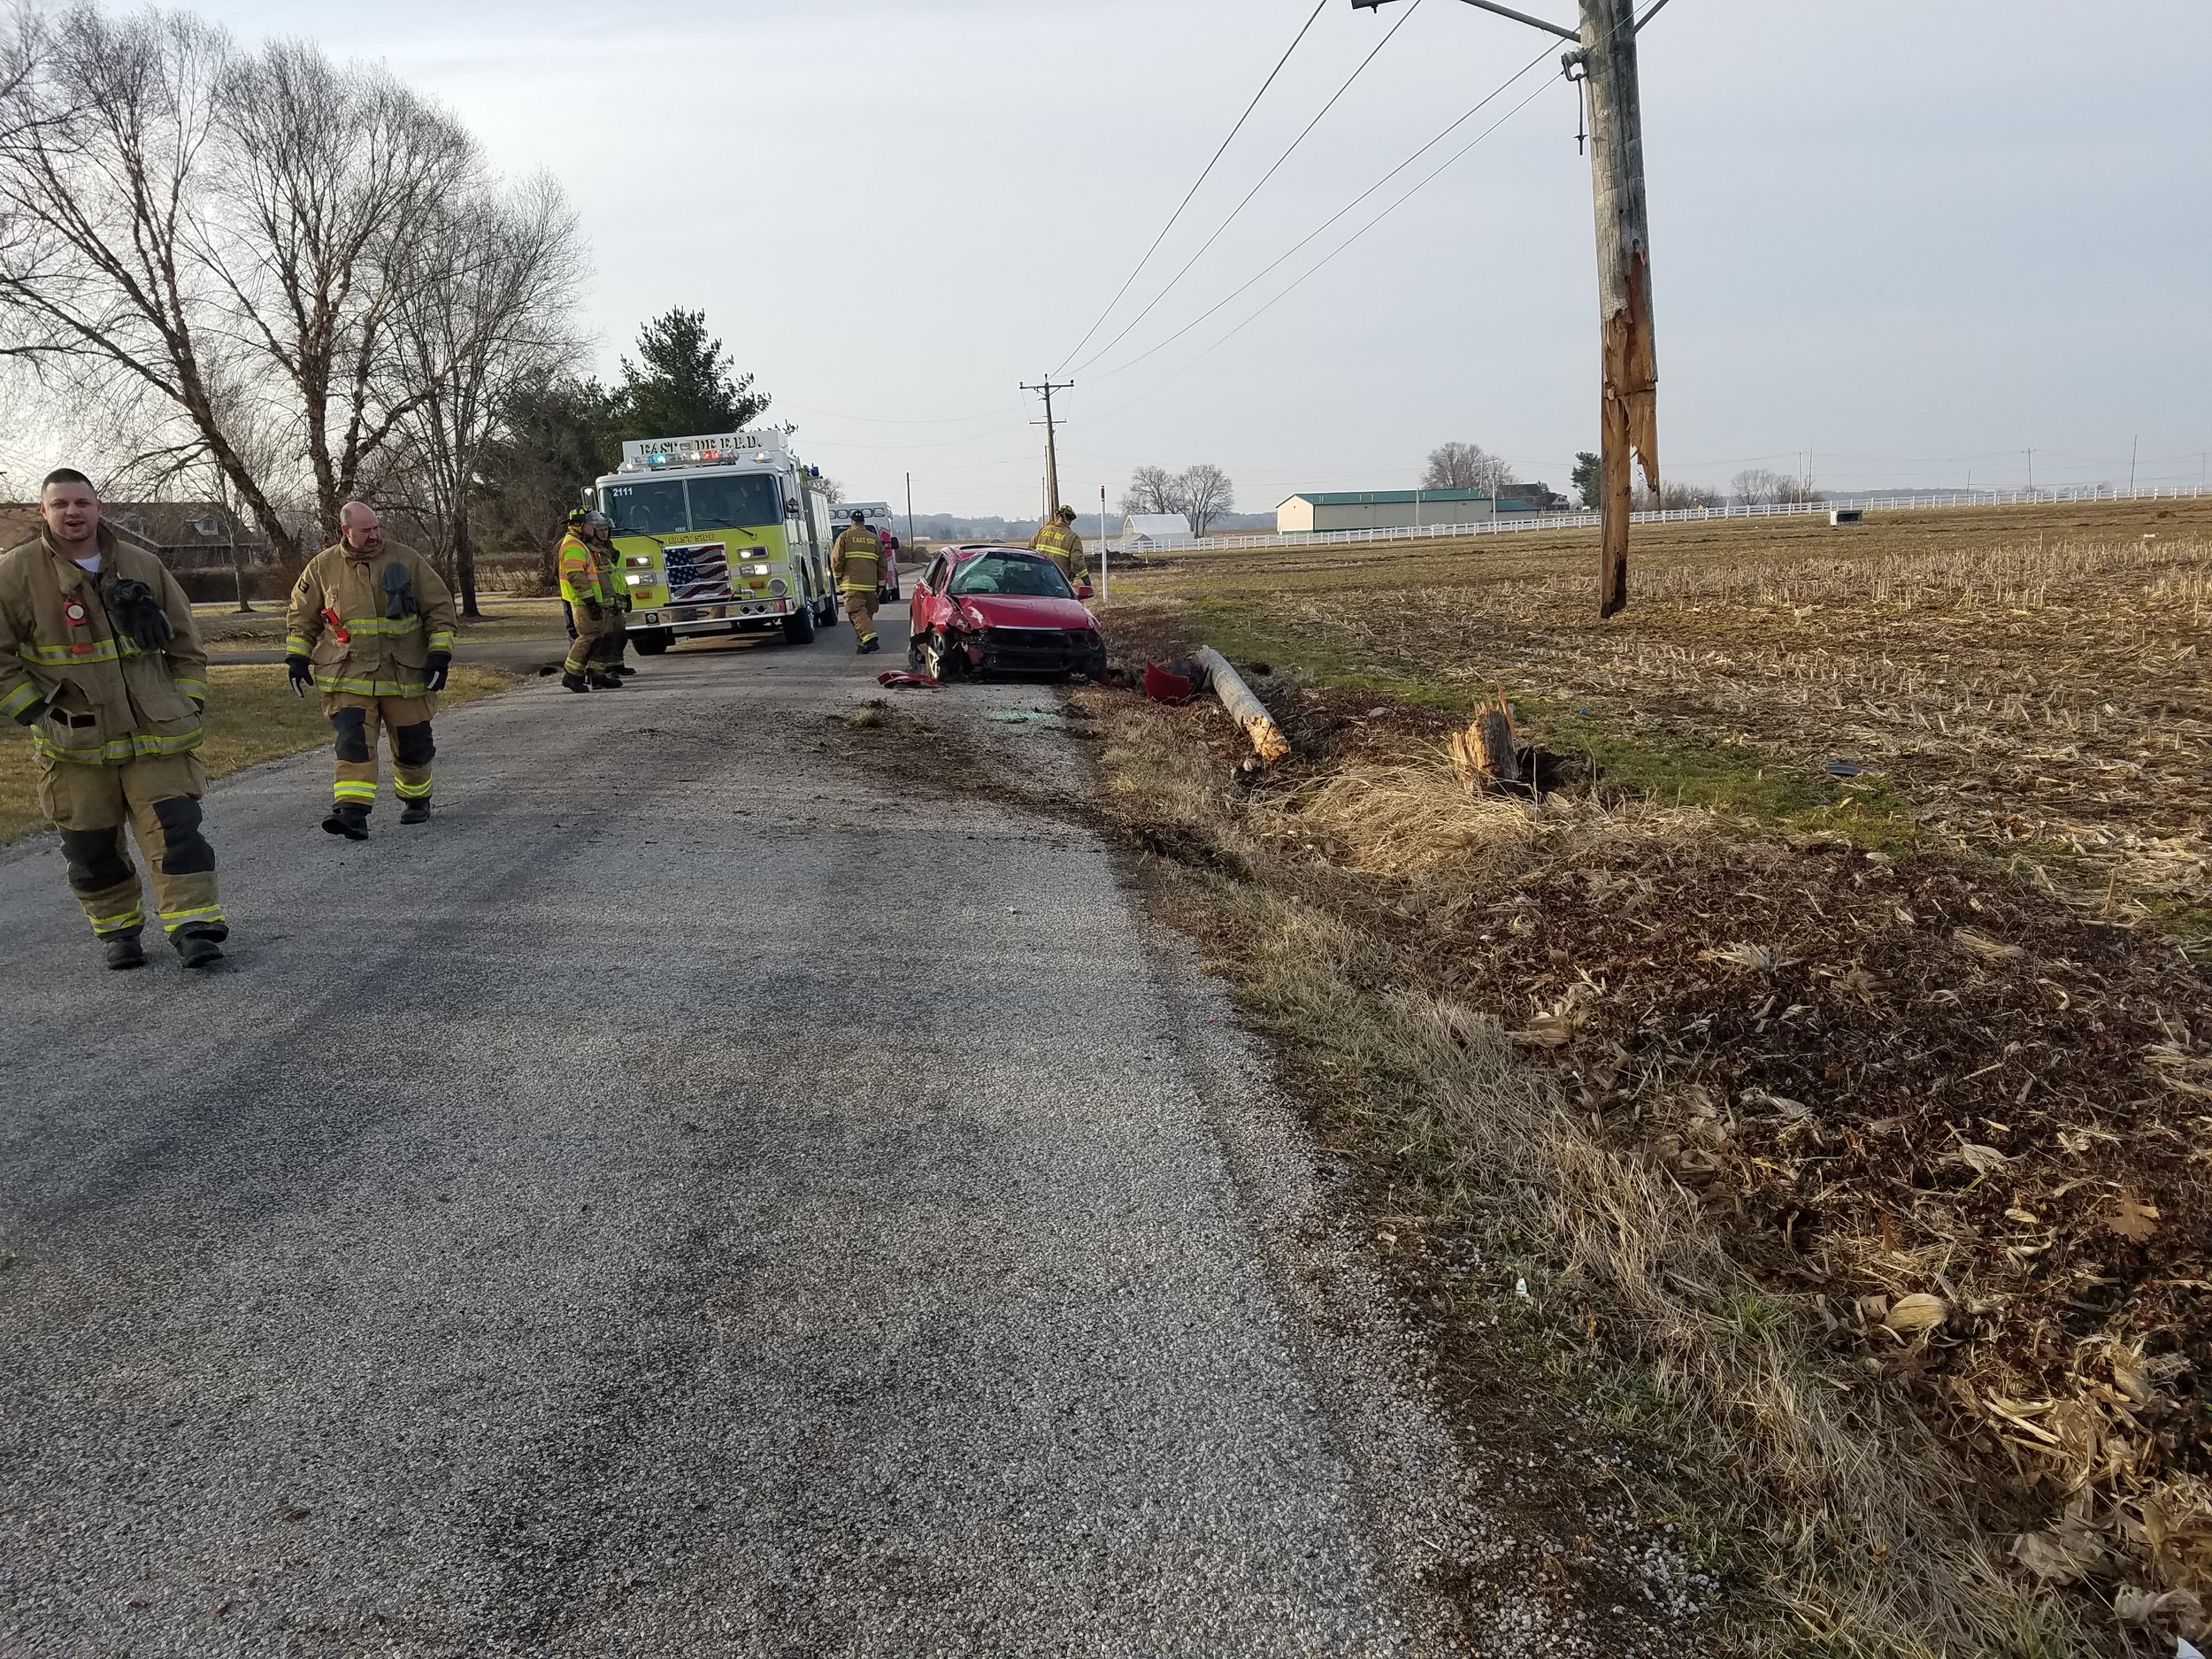  On March 10, 2019, East side responded for a vehicle vs. a utility pole.  